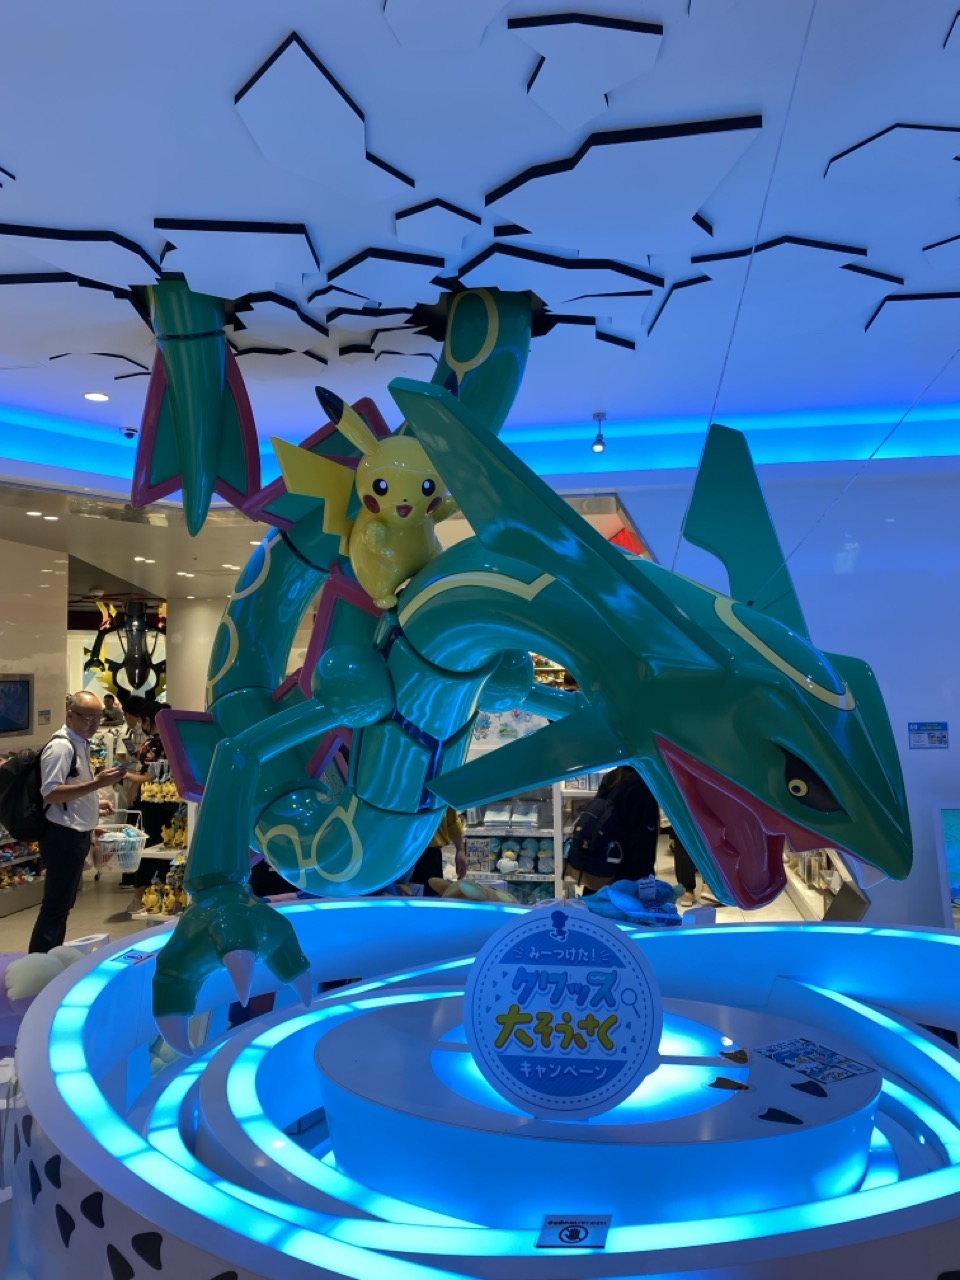 A big statue of Pikachu riding a Rayquaza